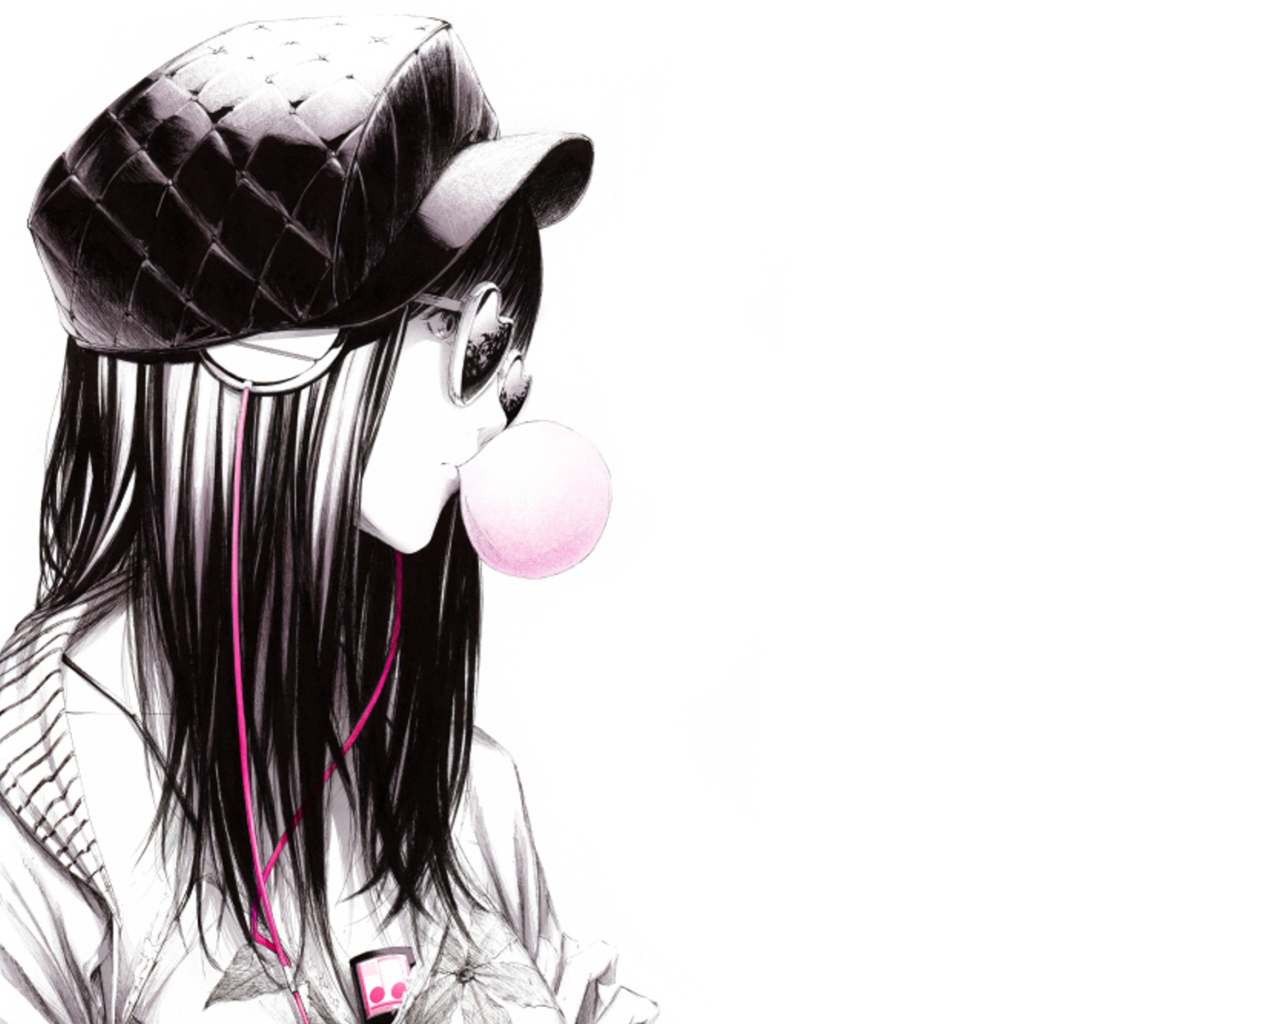 Scatch Of Girl In With Headphones And Gum screenshot #1 1280x1024